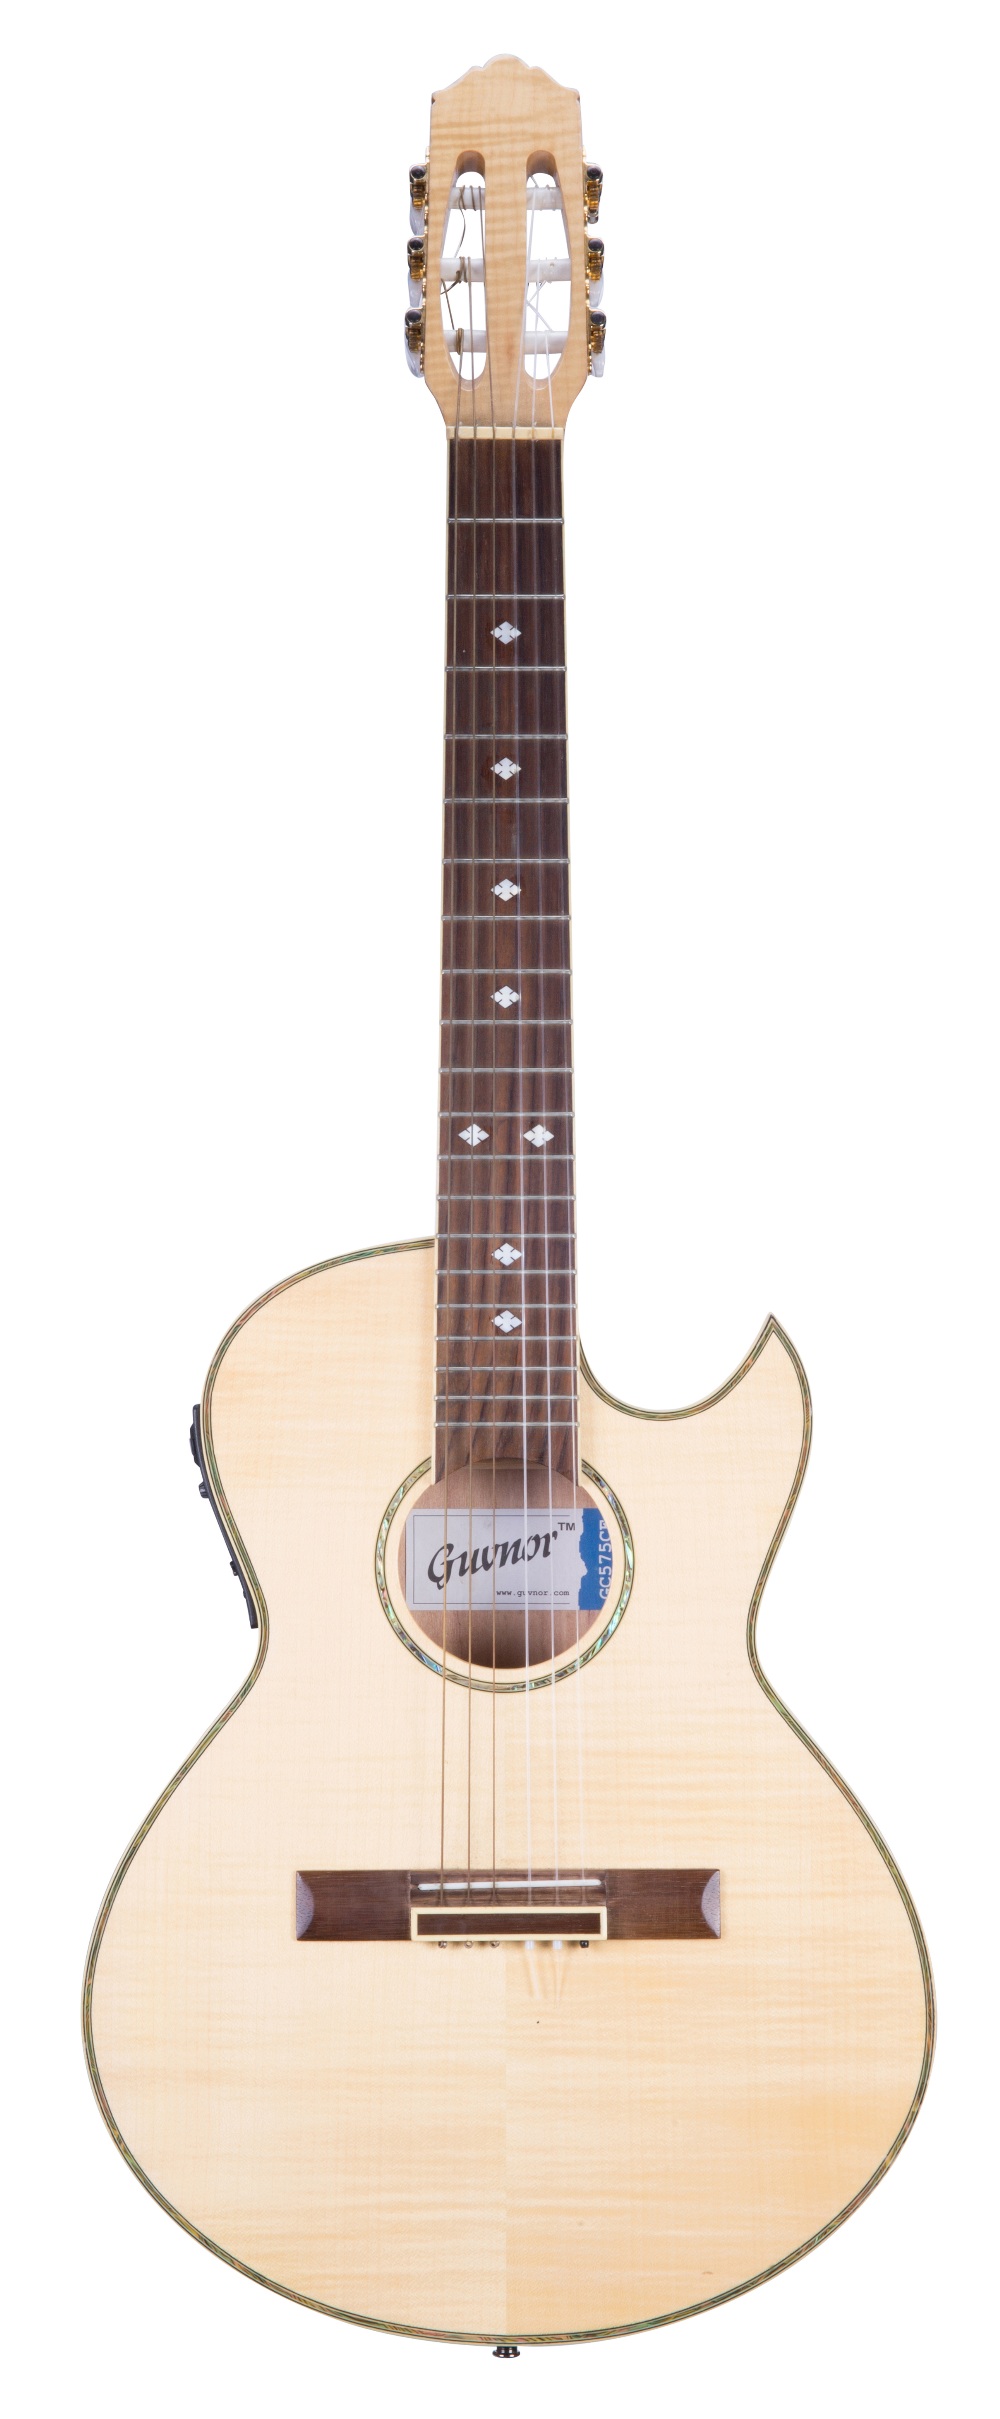 Guvnor GC575CE electro-classical guitar; Finish: natural, heavy lacquer wear to back; Fretboard: